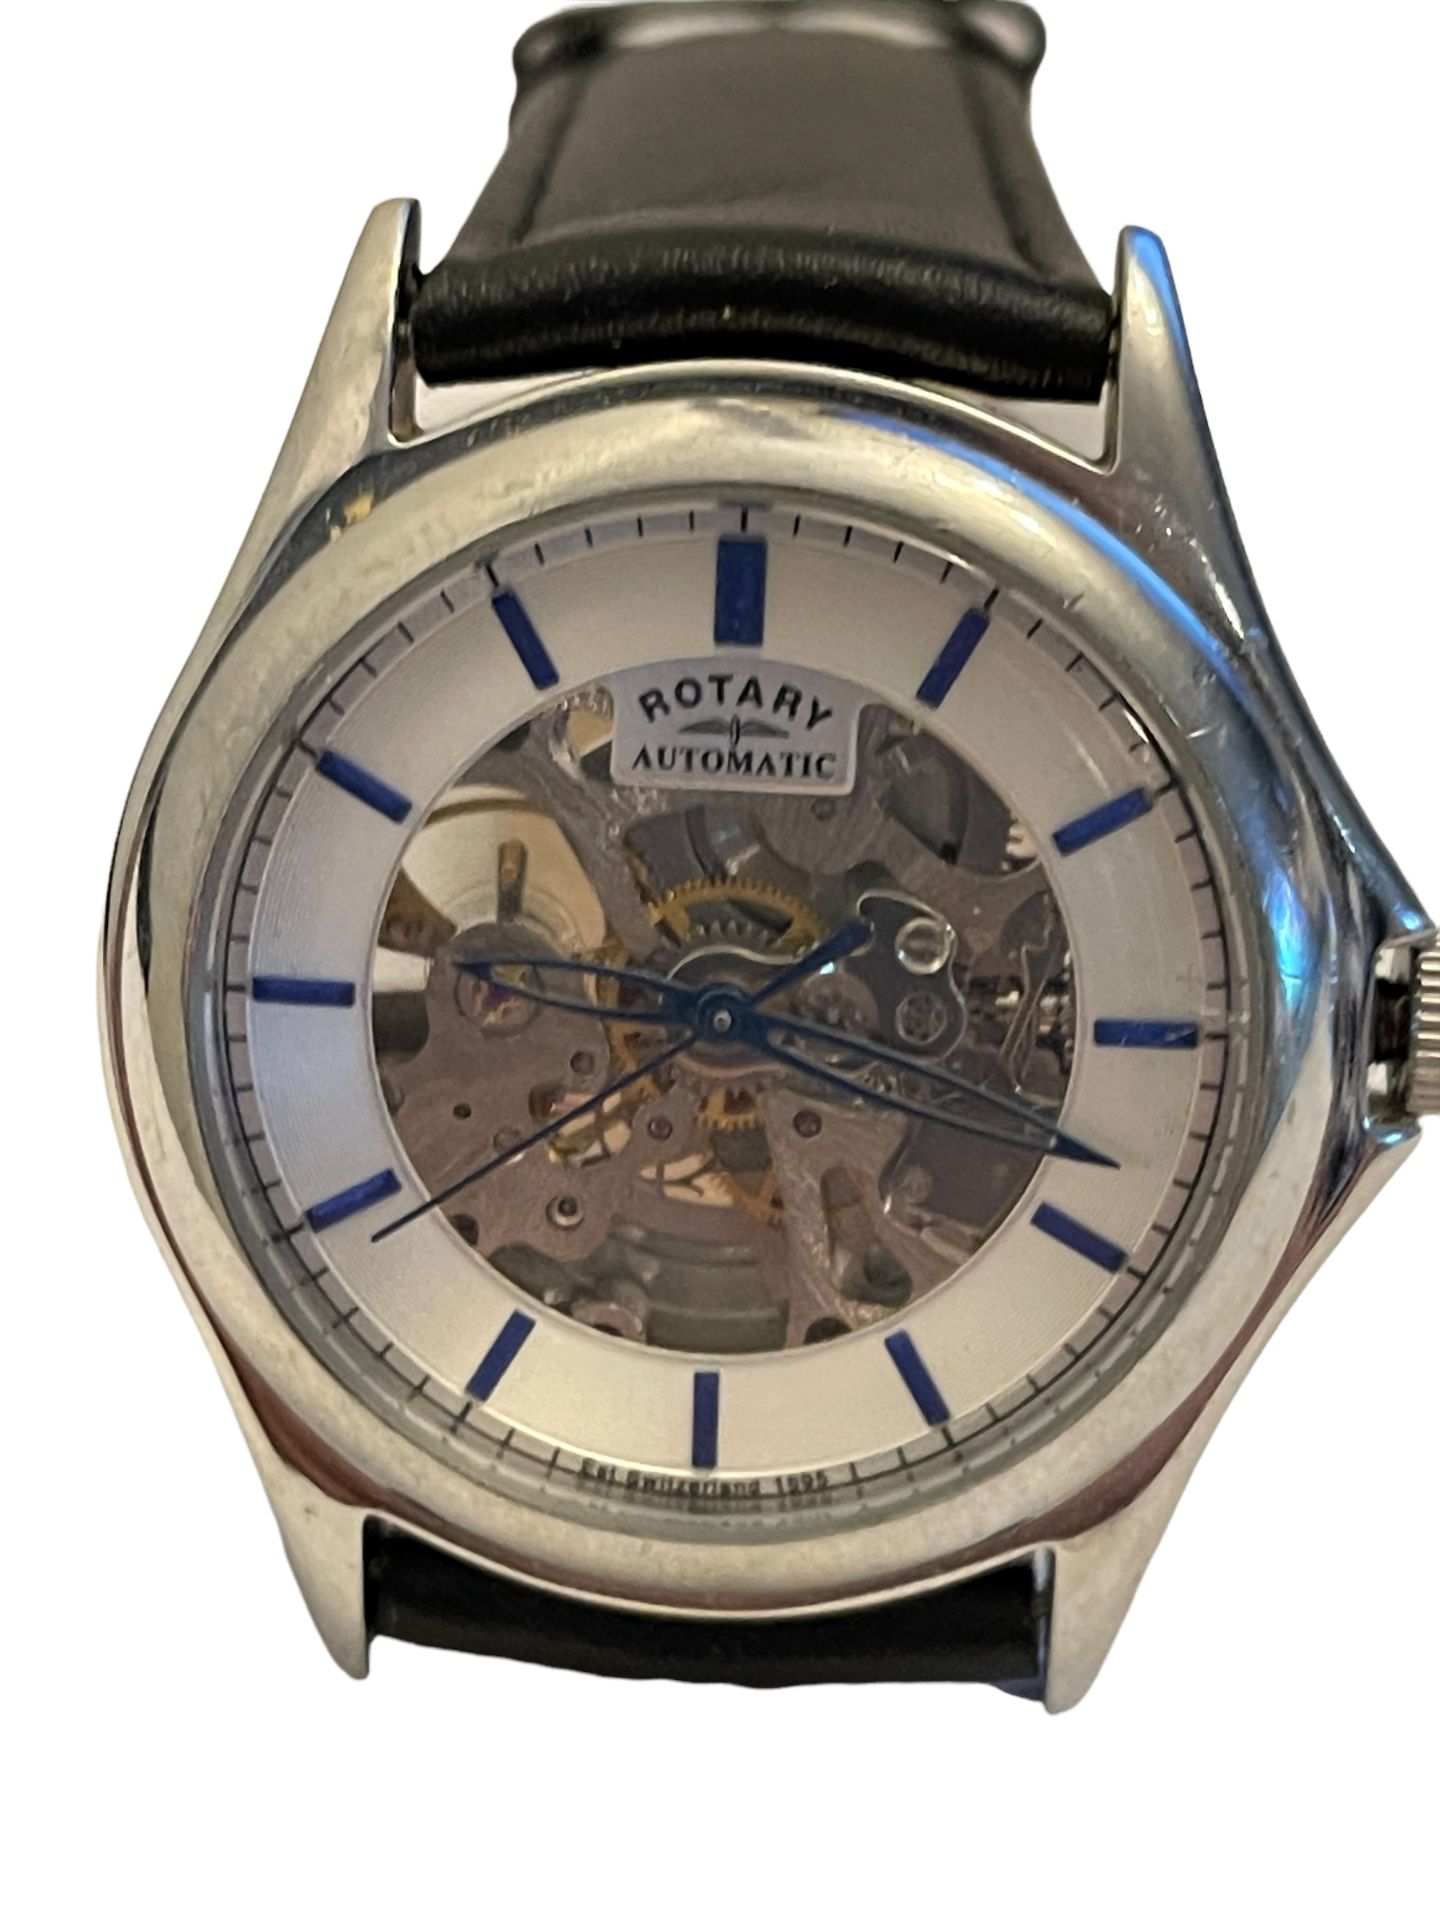 Rotary Skeleton Automatic Mens Watch - Ex Demo or Return Stock from our Private Jet Charter